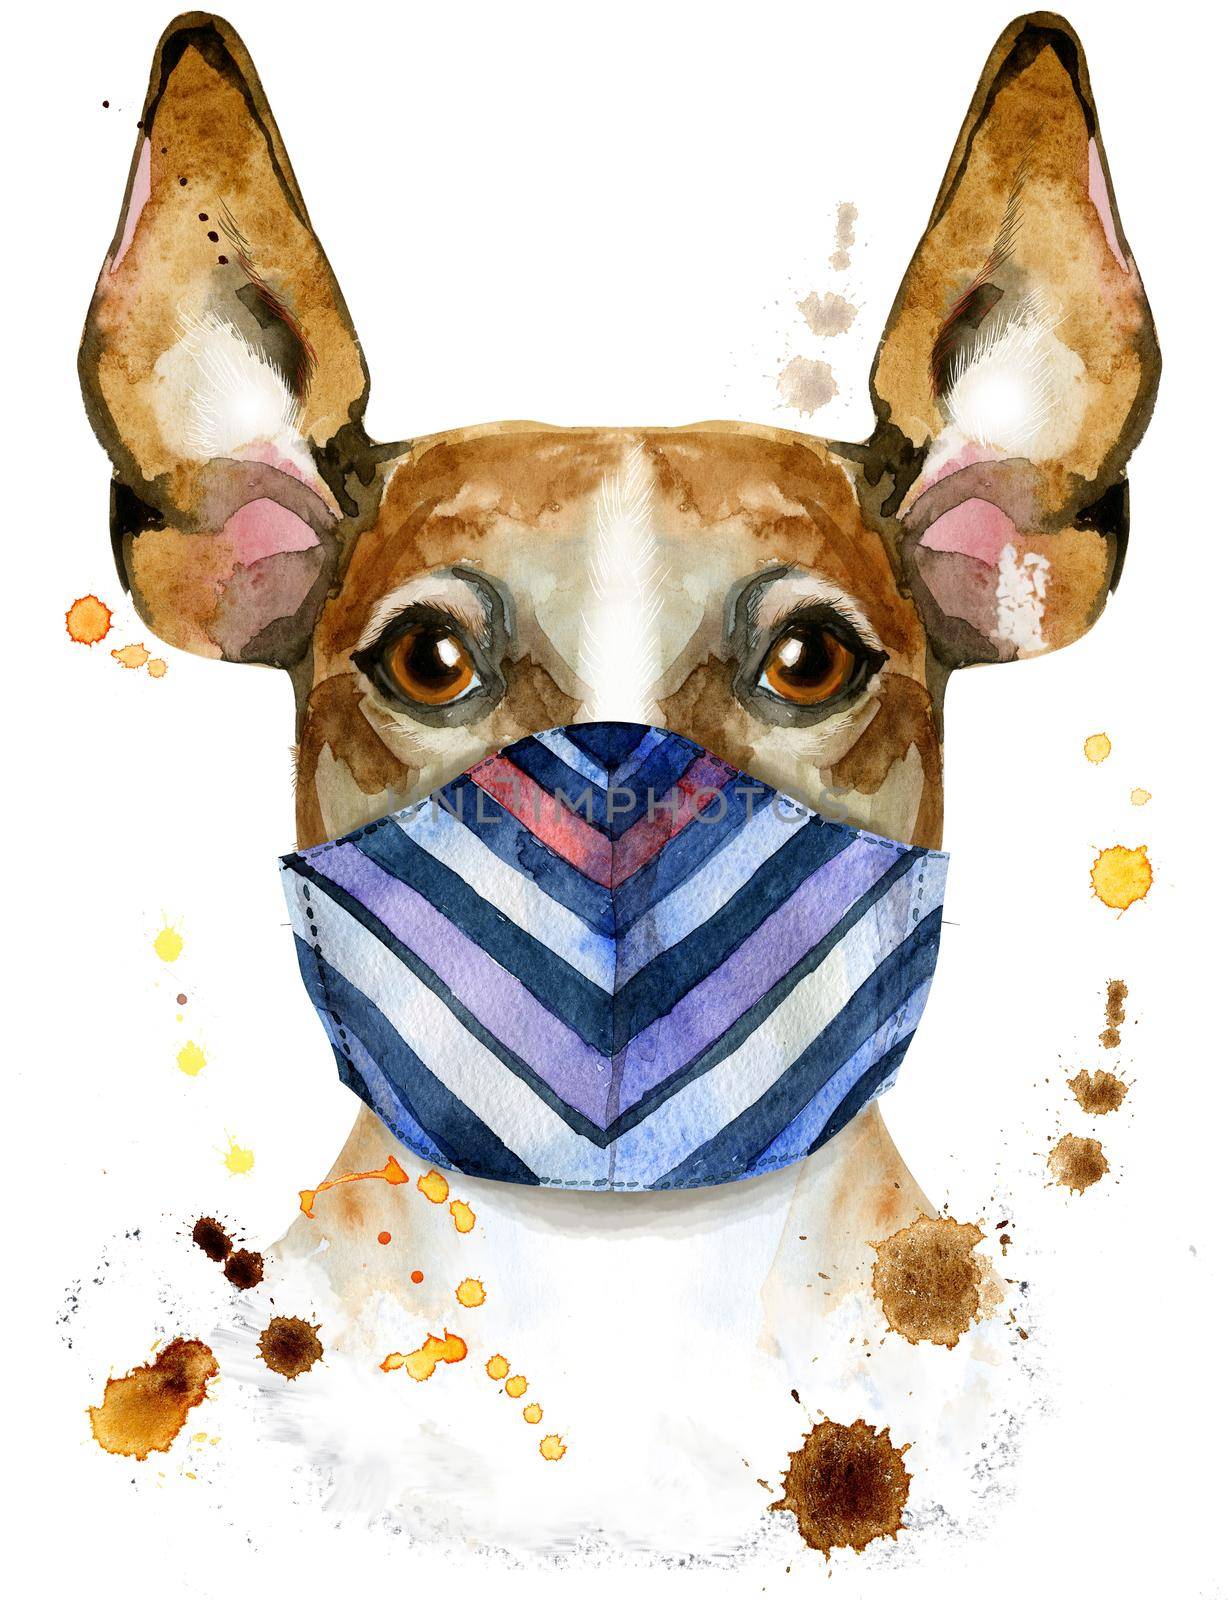 Cute Dog in medical face mask. Dog T-shirt graphics. watercolor jack russell terrier illustration